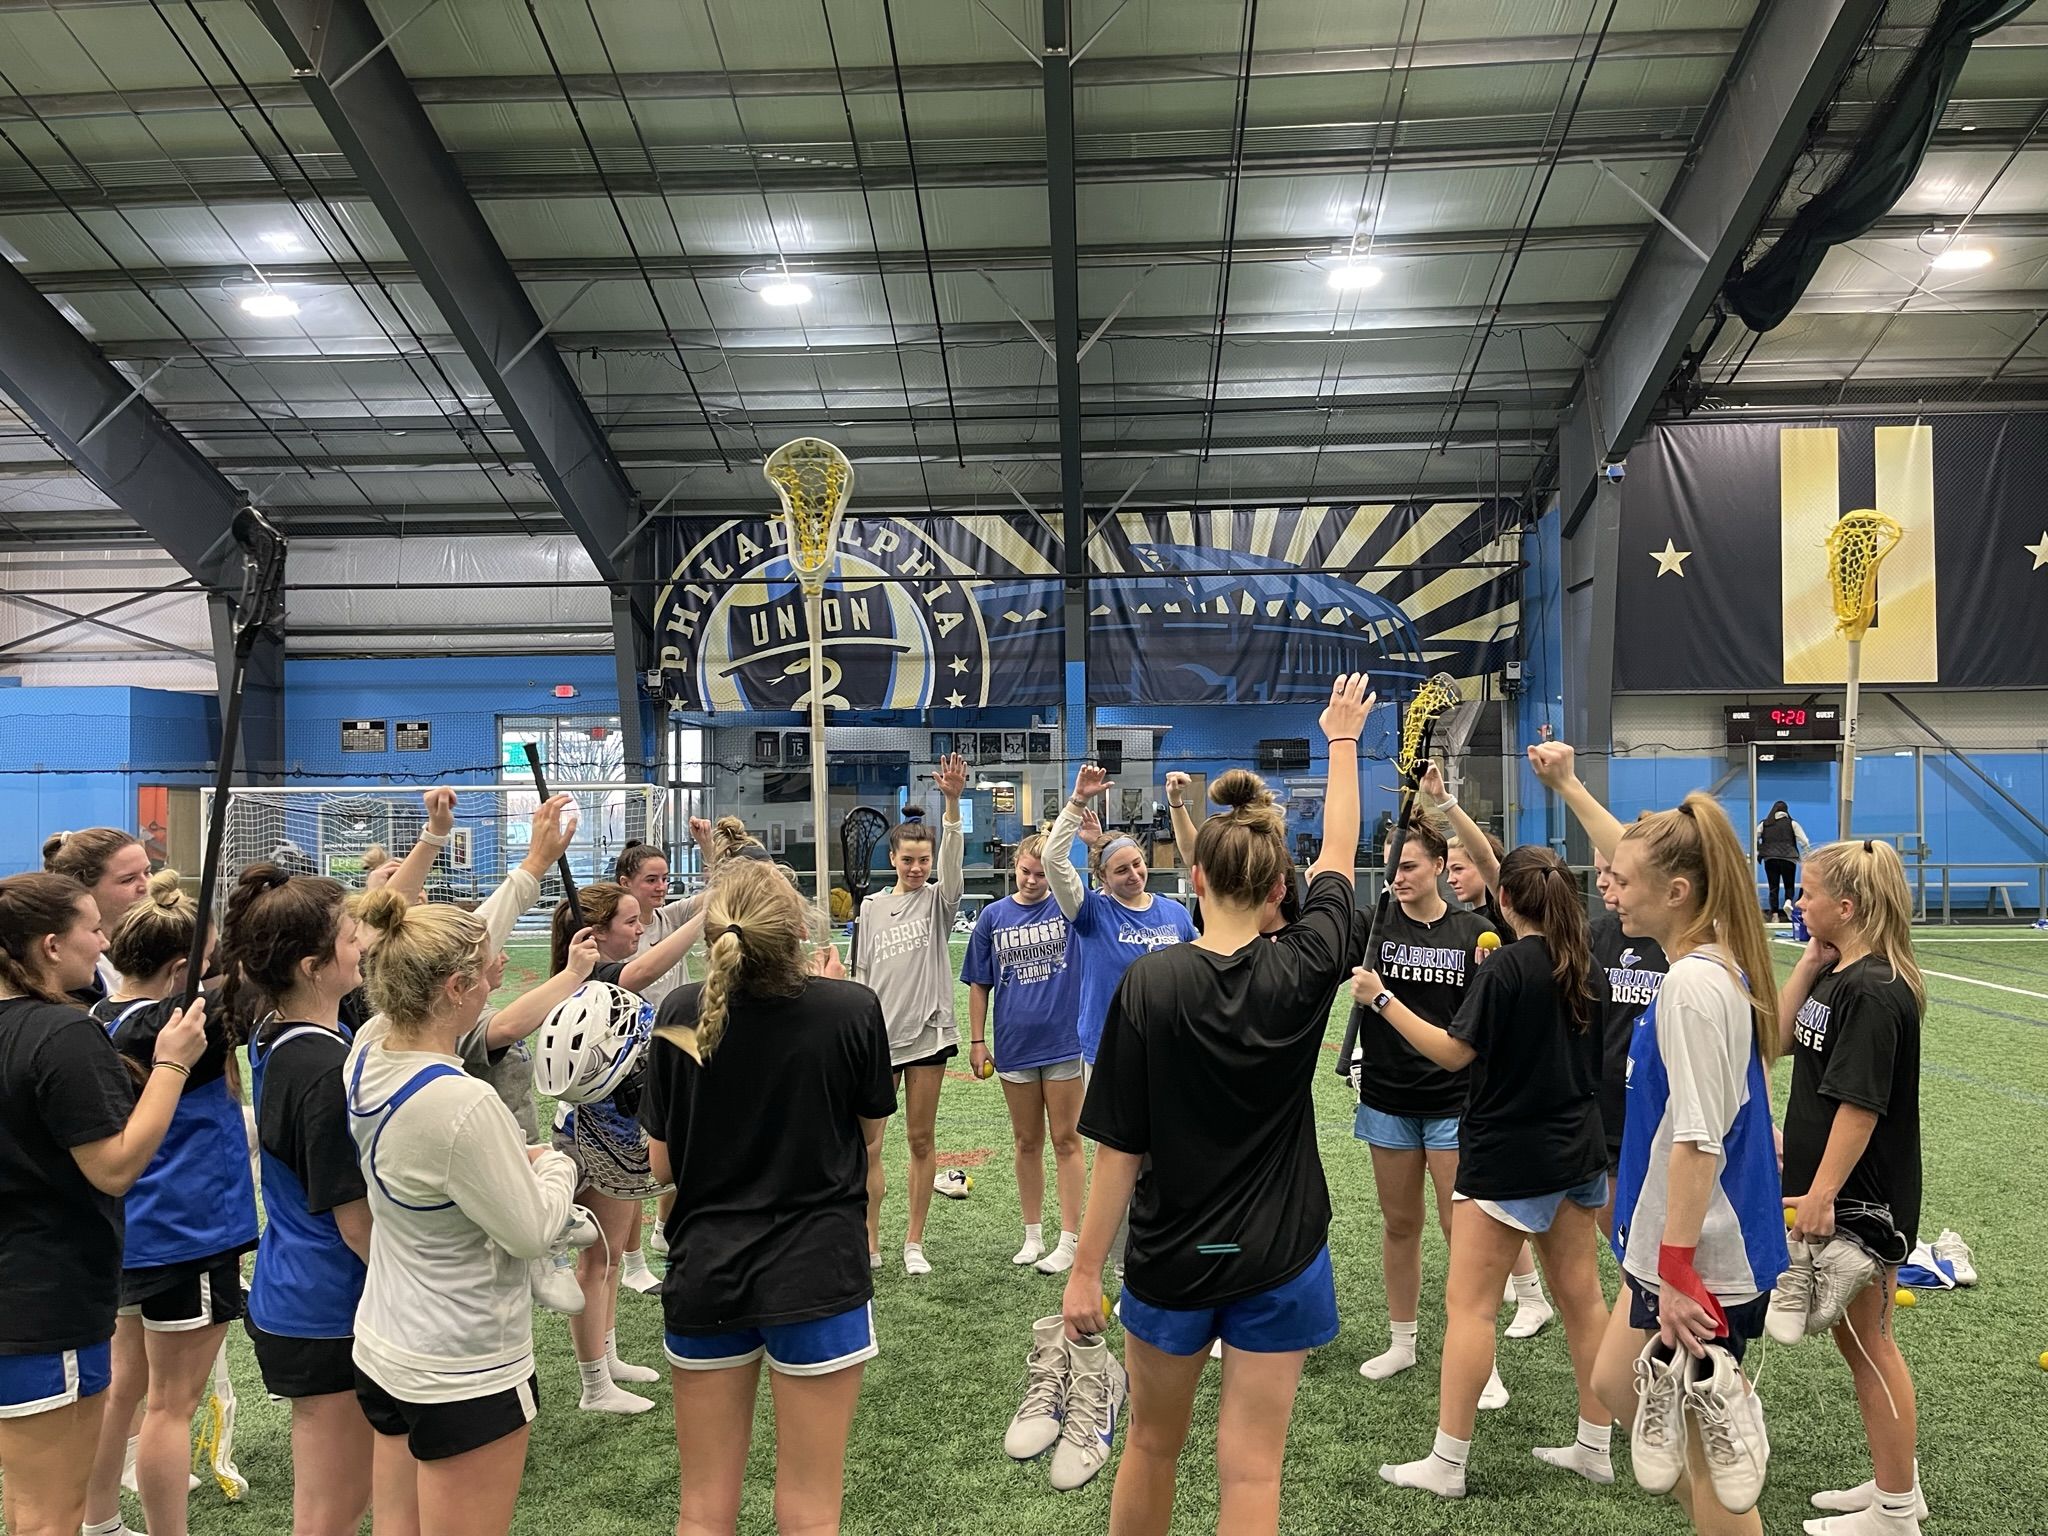 Cabrini women's lacrosse team huddles up at the end of practice. Photo by Julie Cross.